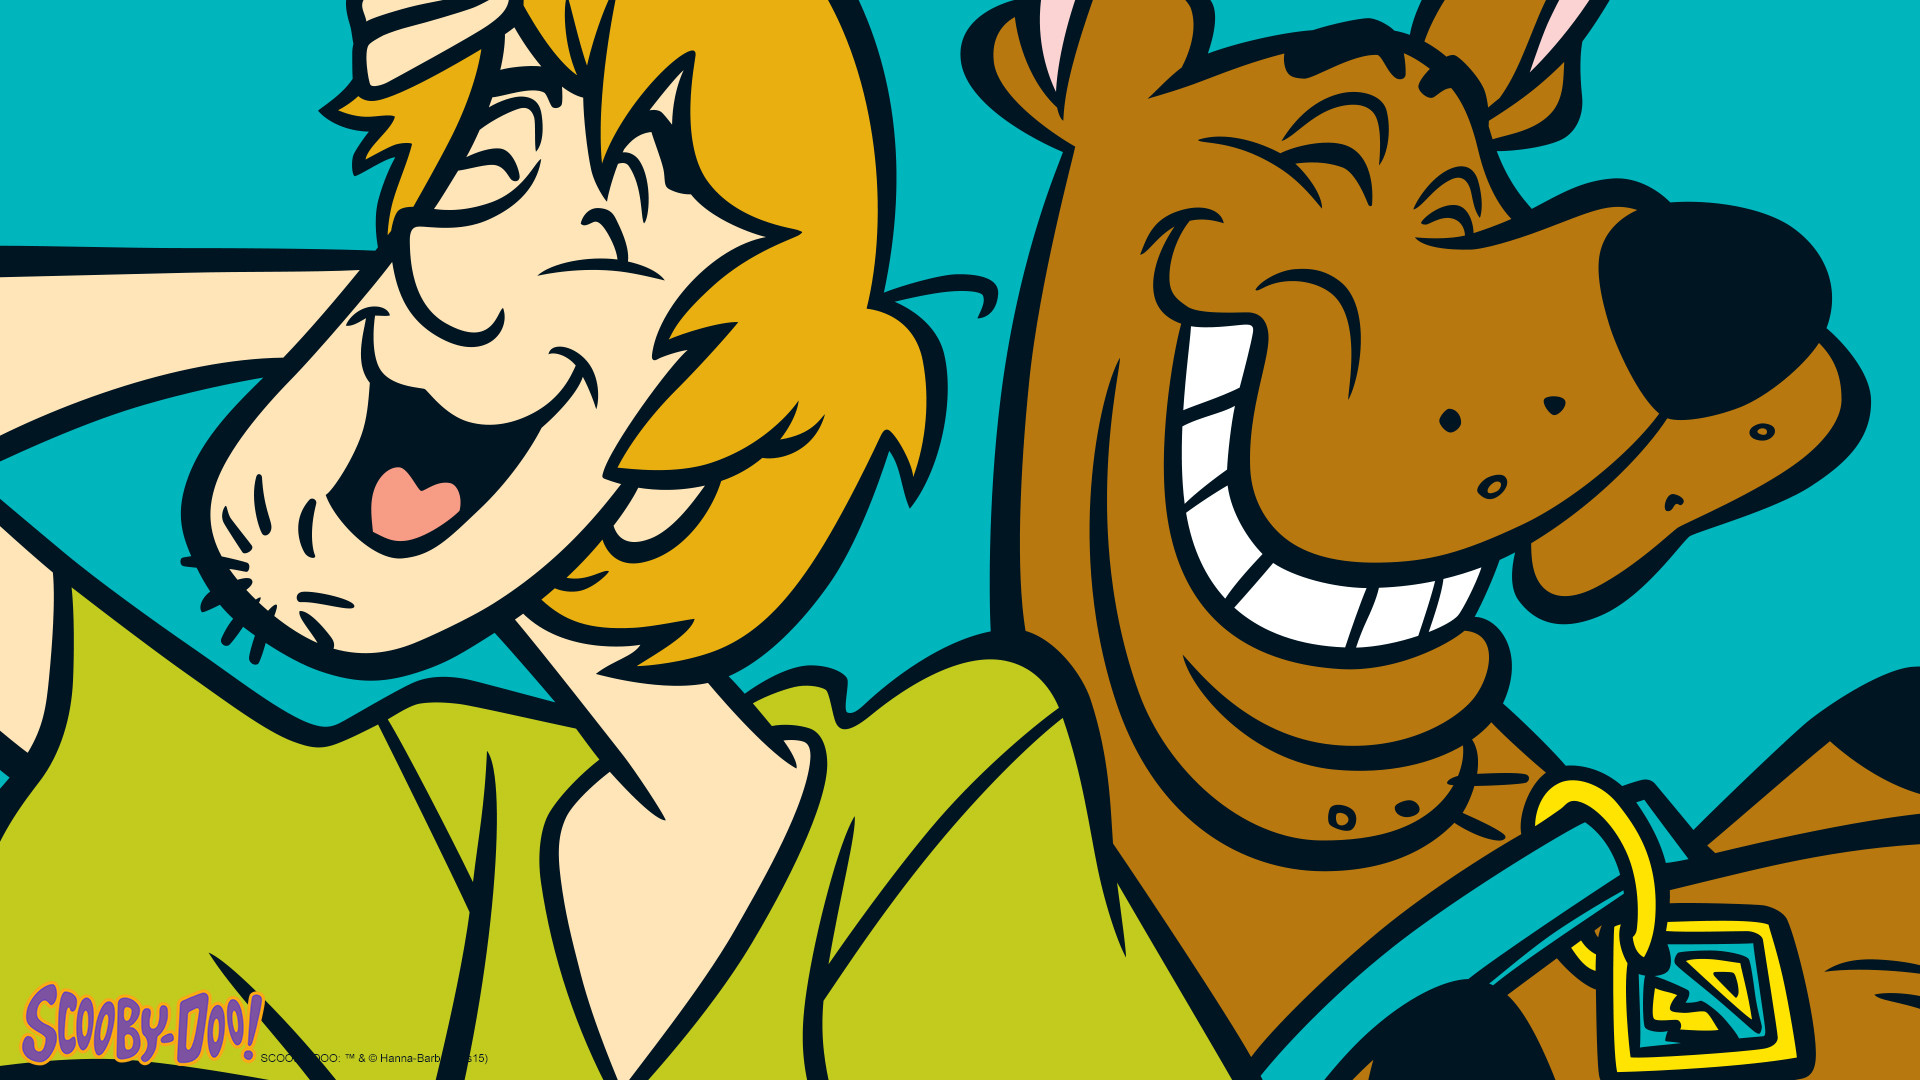 Scooby and shaggy wallpaper. 